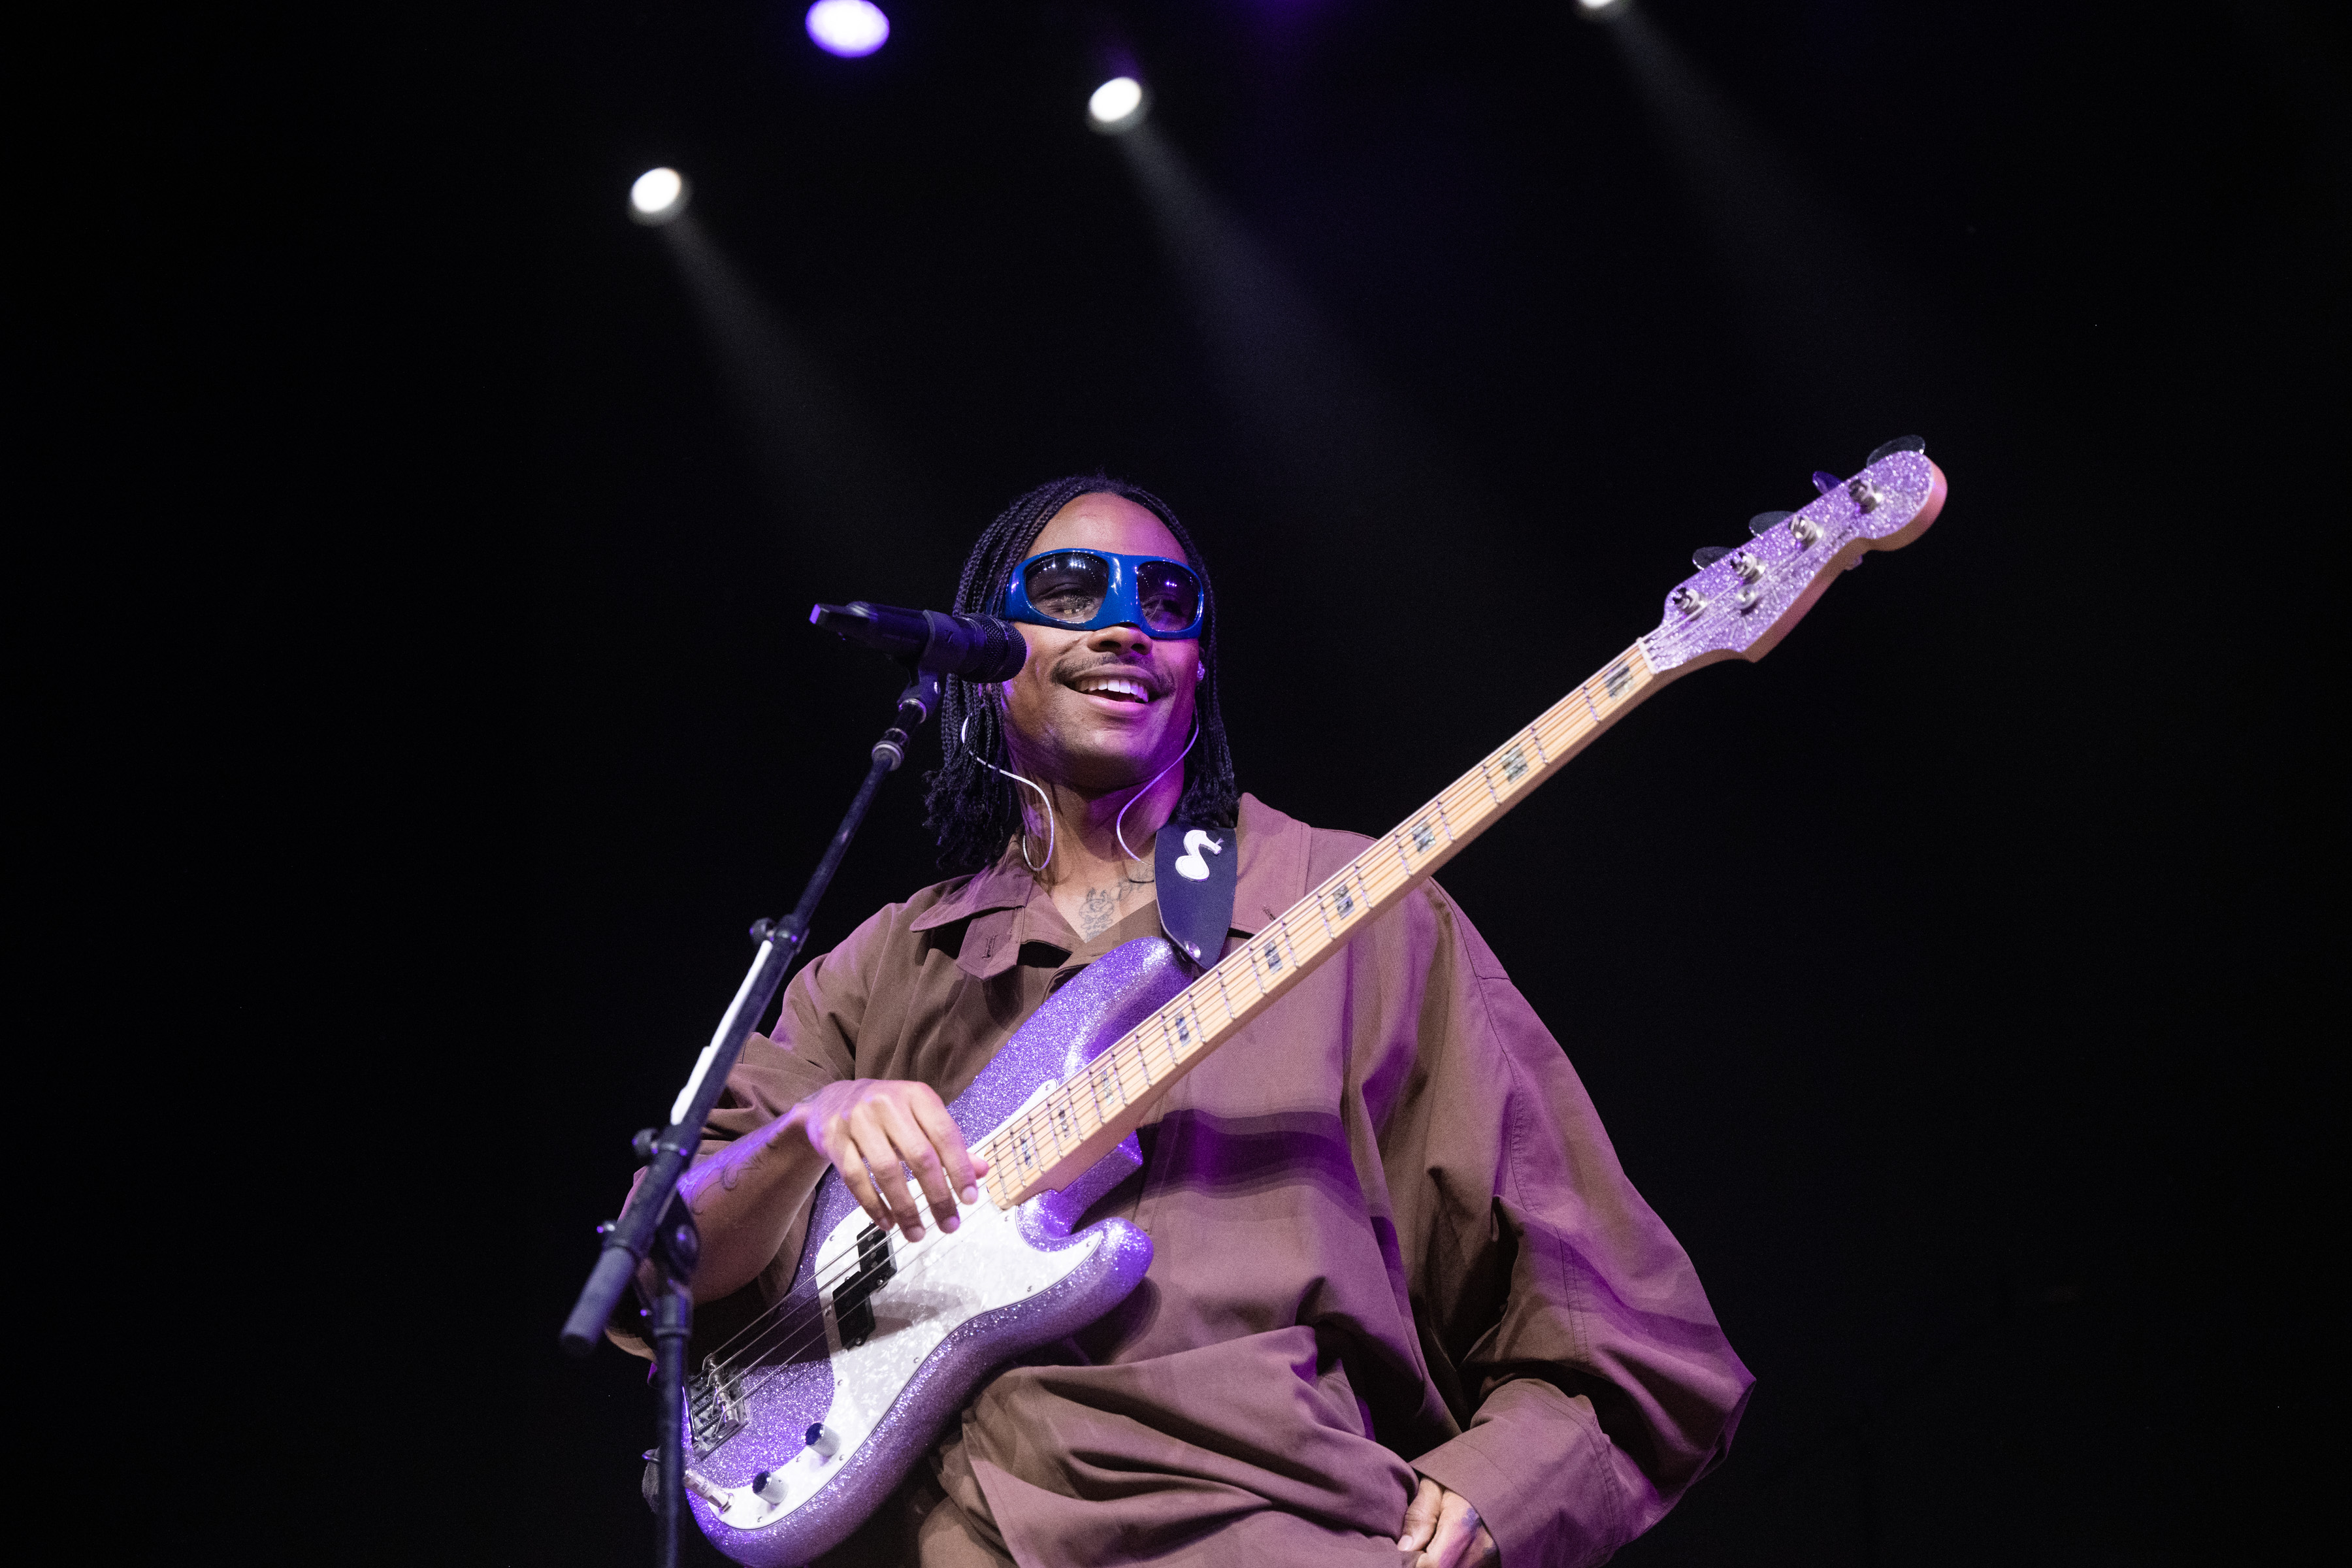 Steve Lacy is pictured during his performance on the Mojave Stage at Weekend 2, Day 2 of the 2022 Coachella Valley Music and Arts Festival on April 23, 2022, in Indio, California | Source: Getty Images